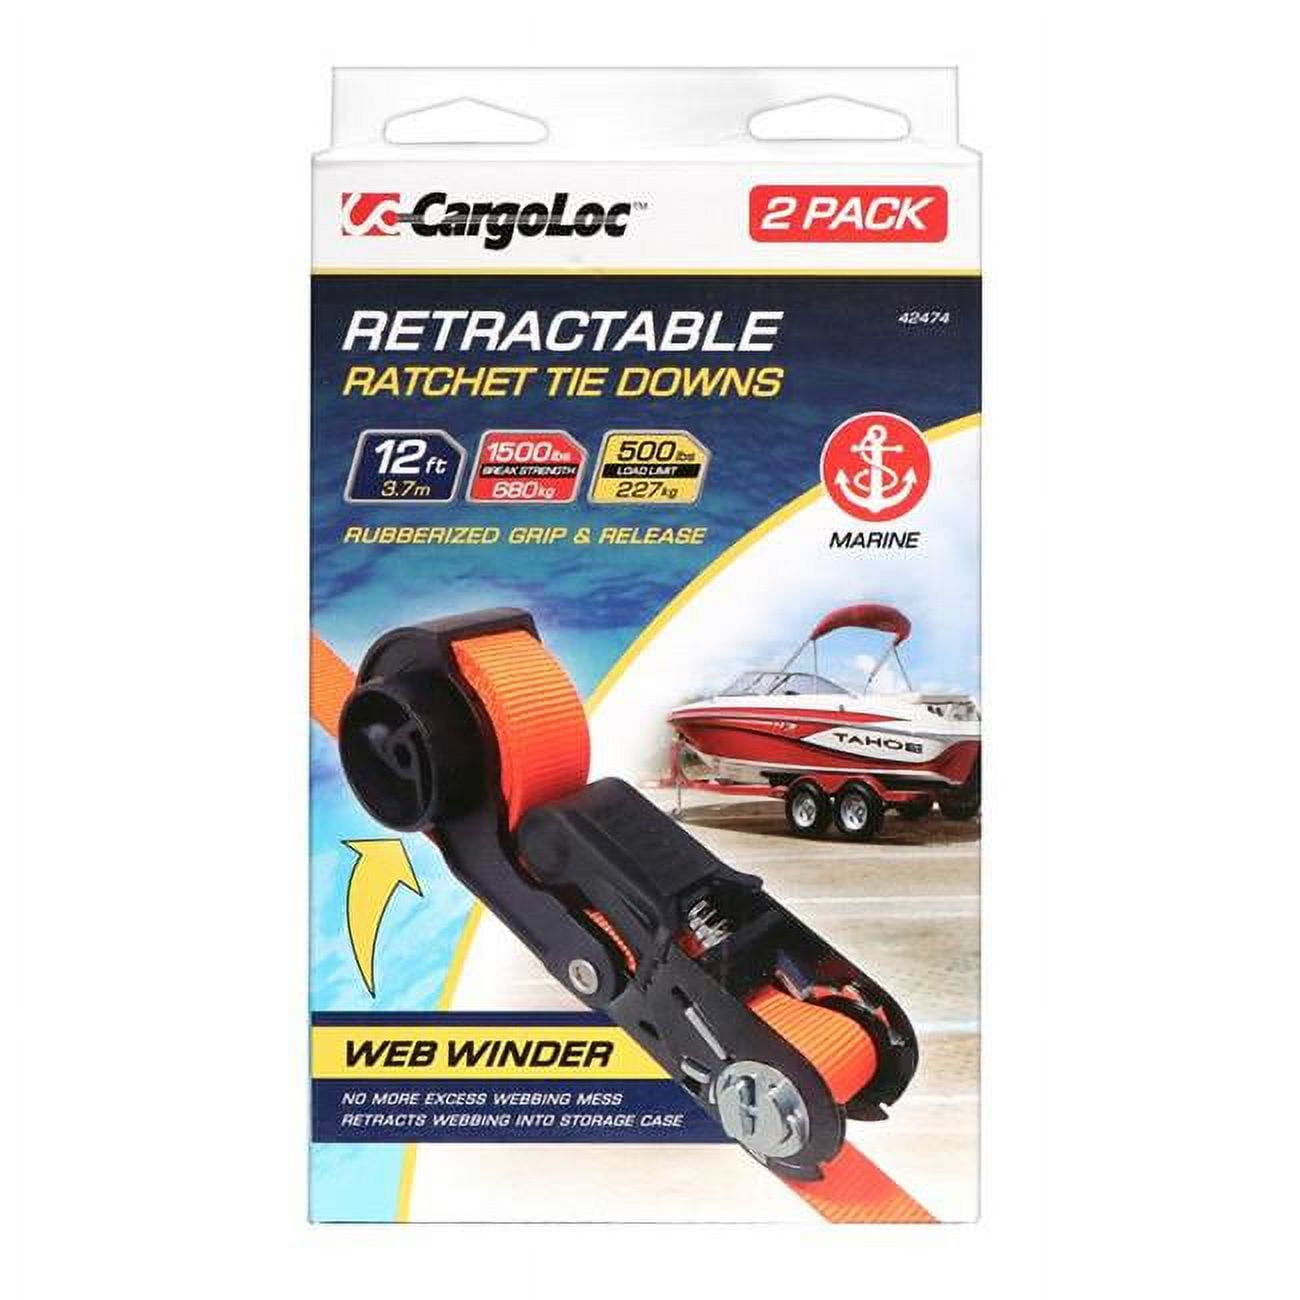 Picture of Cargoloc 42474 12 ft. 1500 lbs Retractable Tie Downs Ratchet Strap with S-Marine - 2 Piece